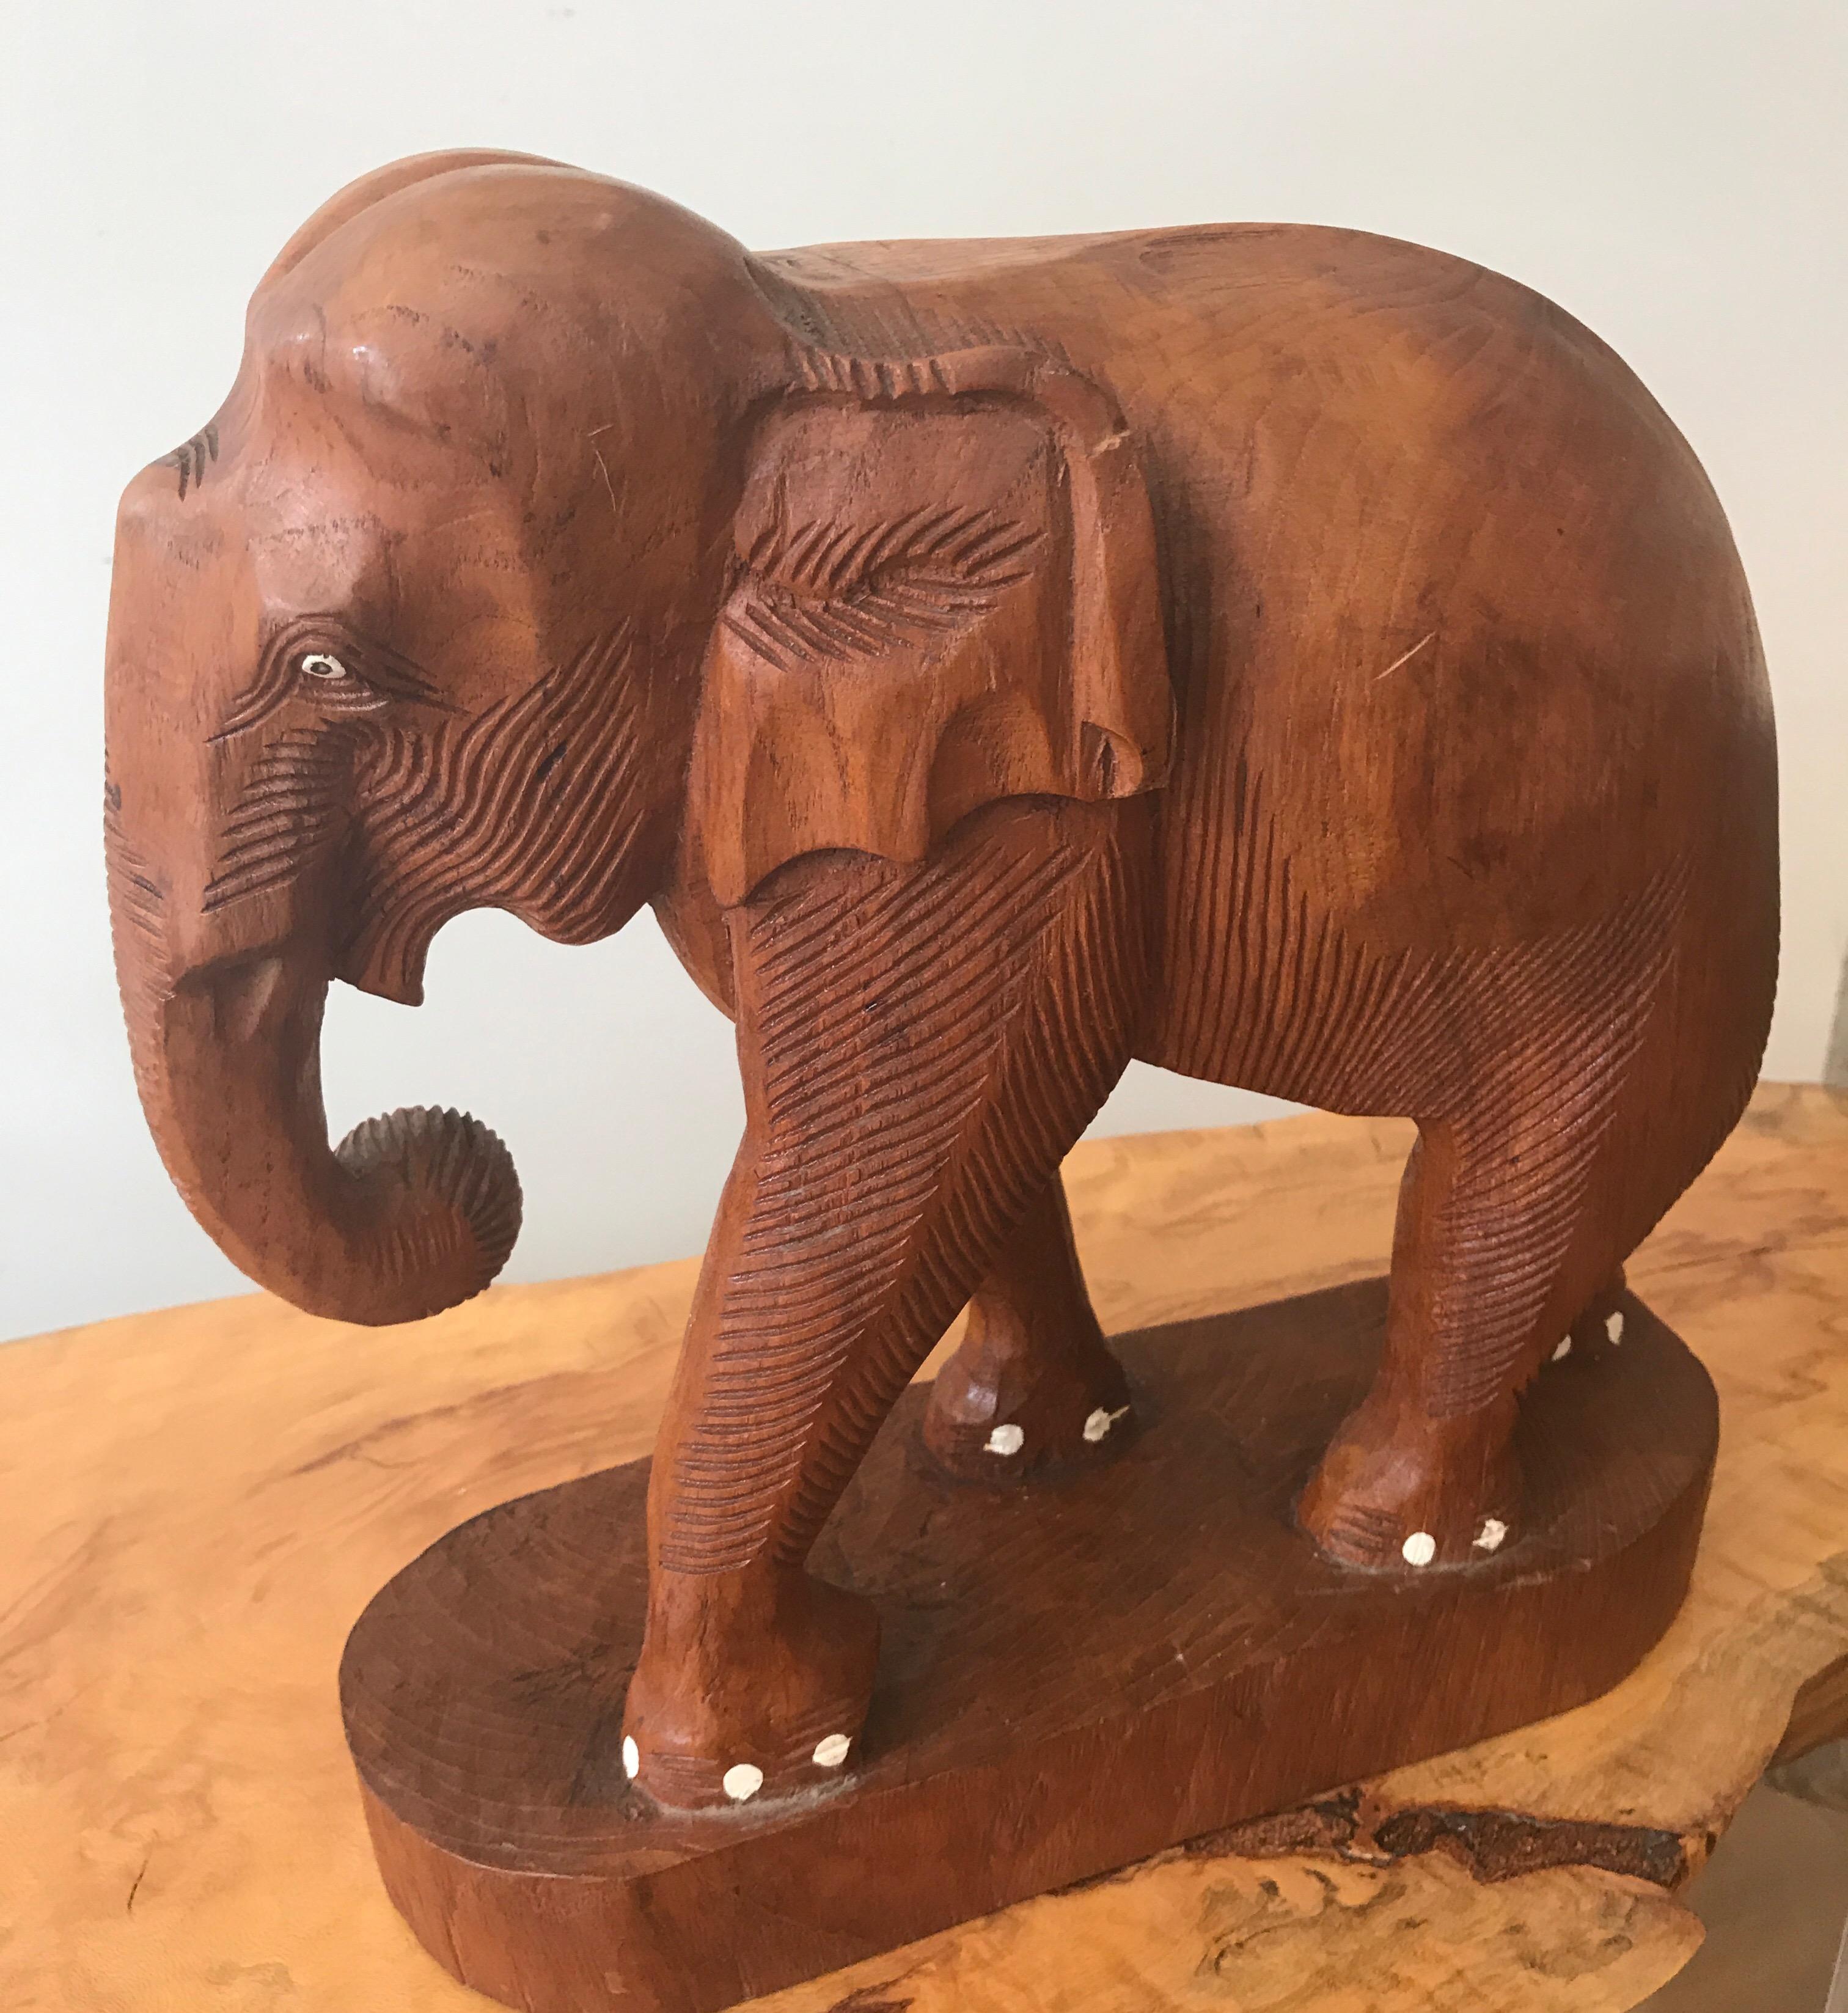 Large finely carved Indian wood sculpture of an Elephant.
The exotic pachyderm has painted toenails
and appears to have had tusks at one time.
Exceptional table top decorative object.

    